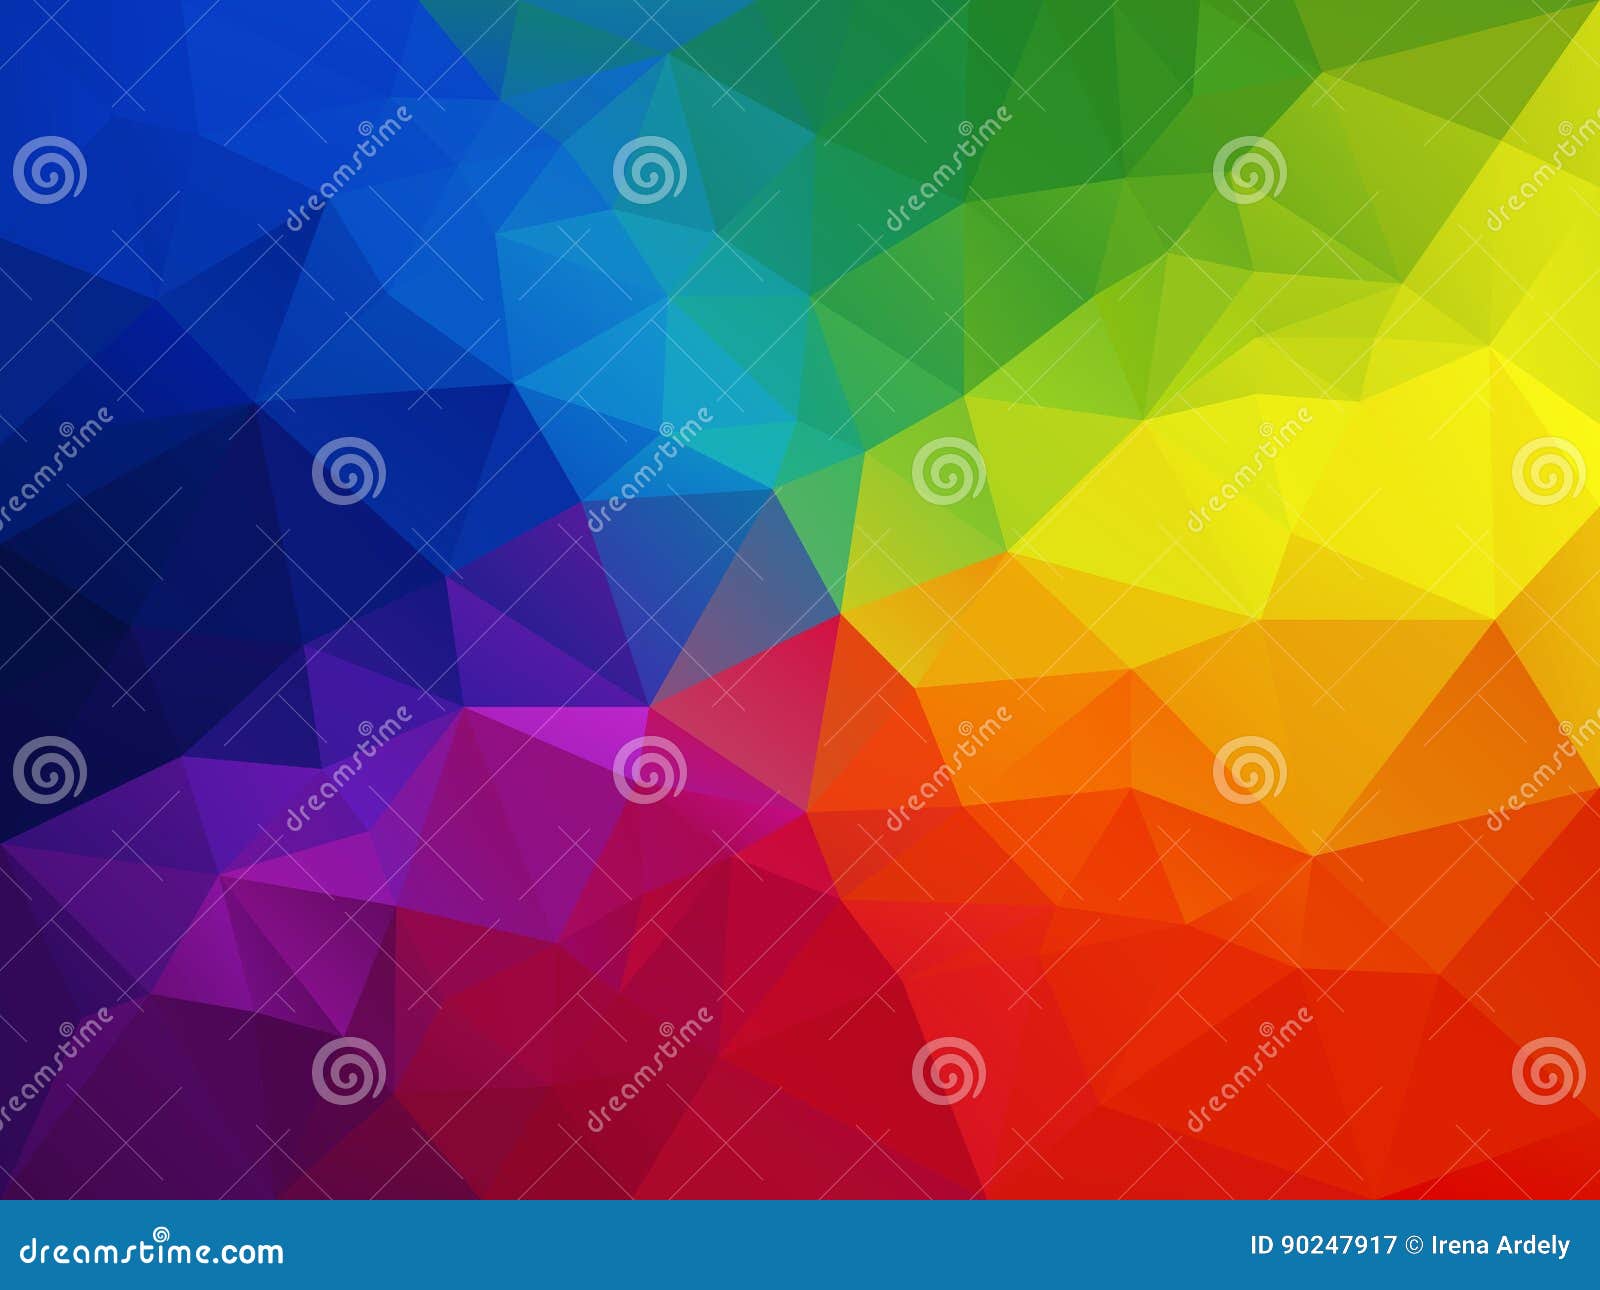  abstract polygon background with a triangle pattern in multi color - colorful rainbow spectrum